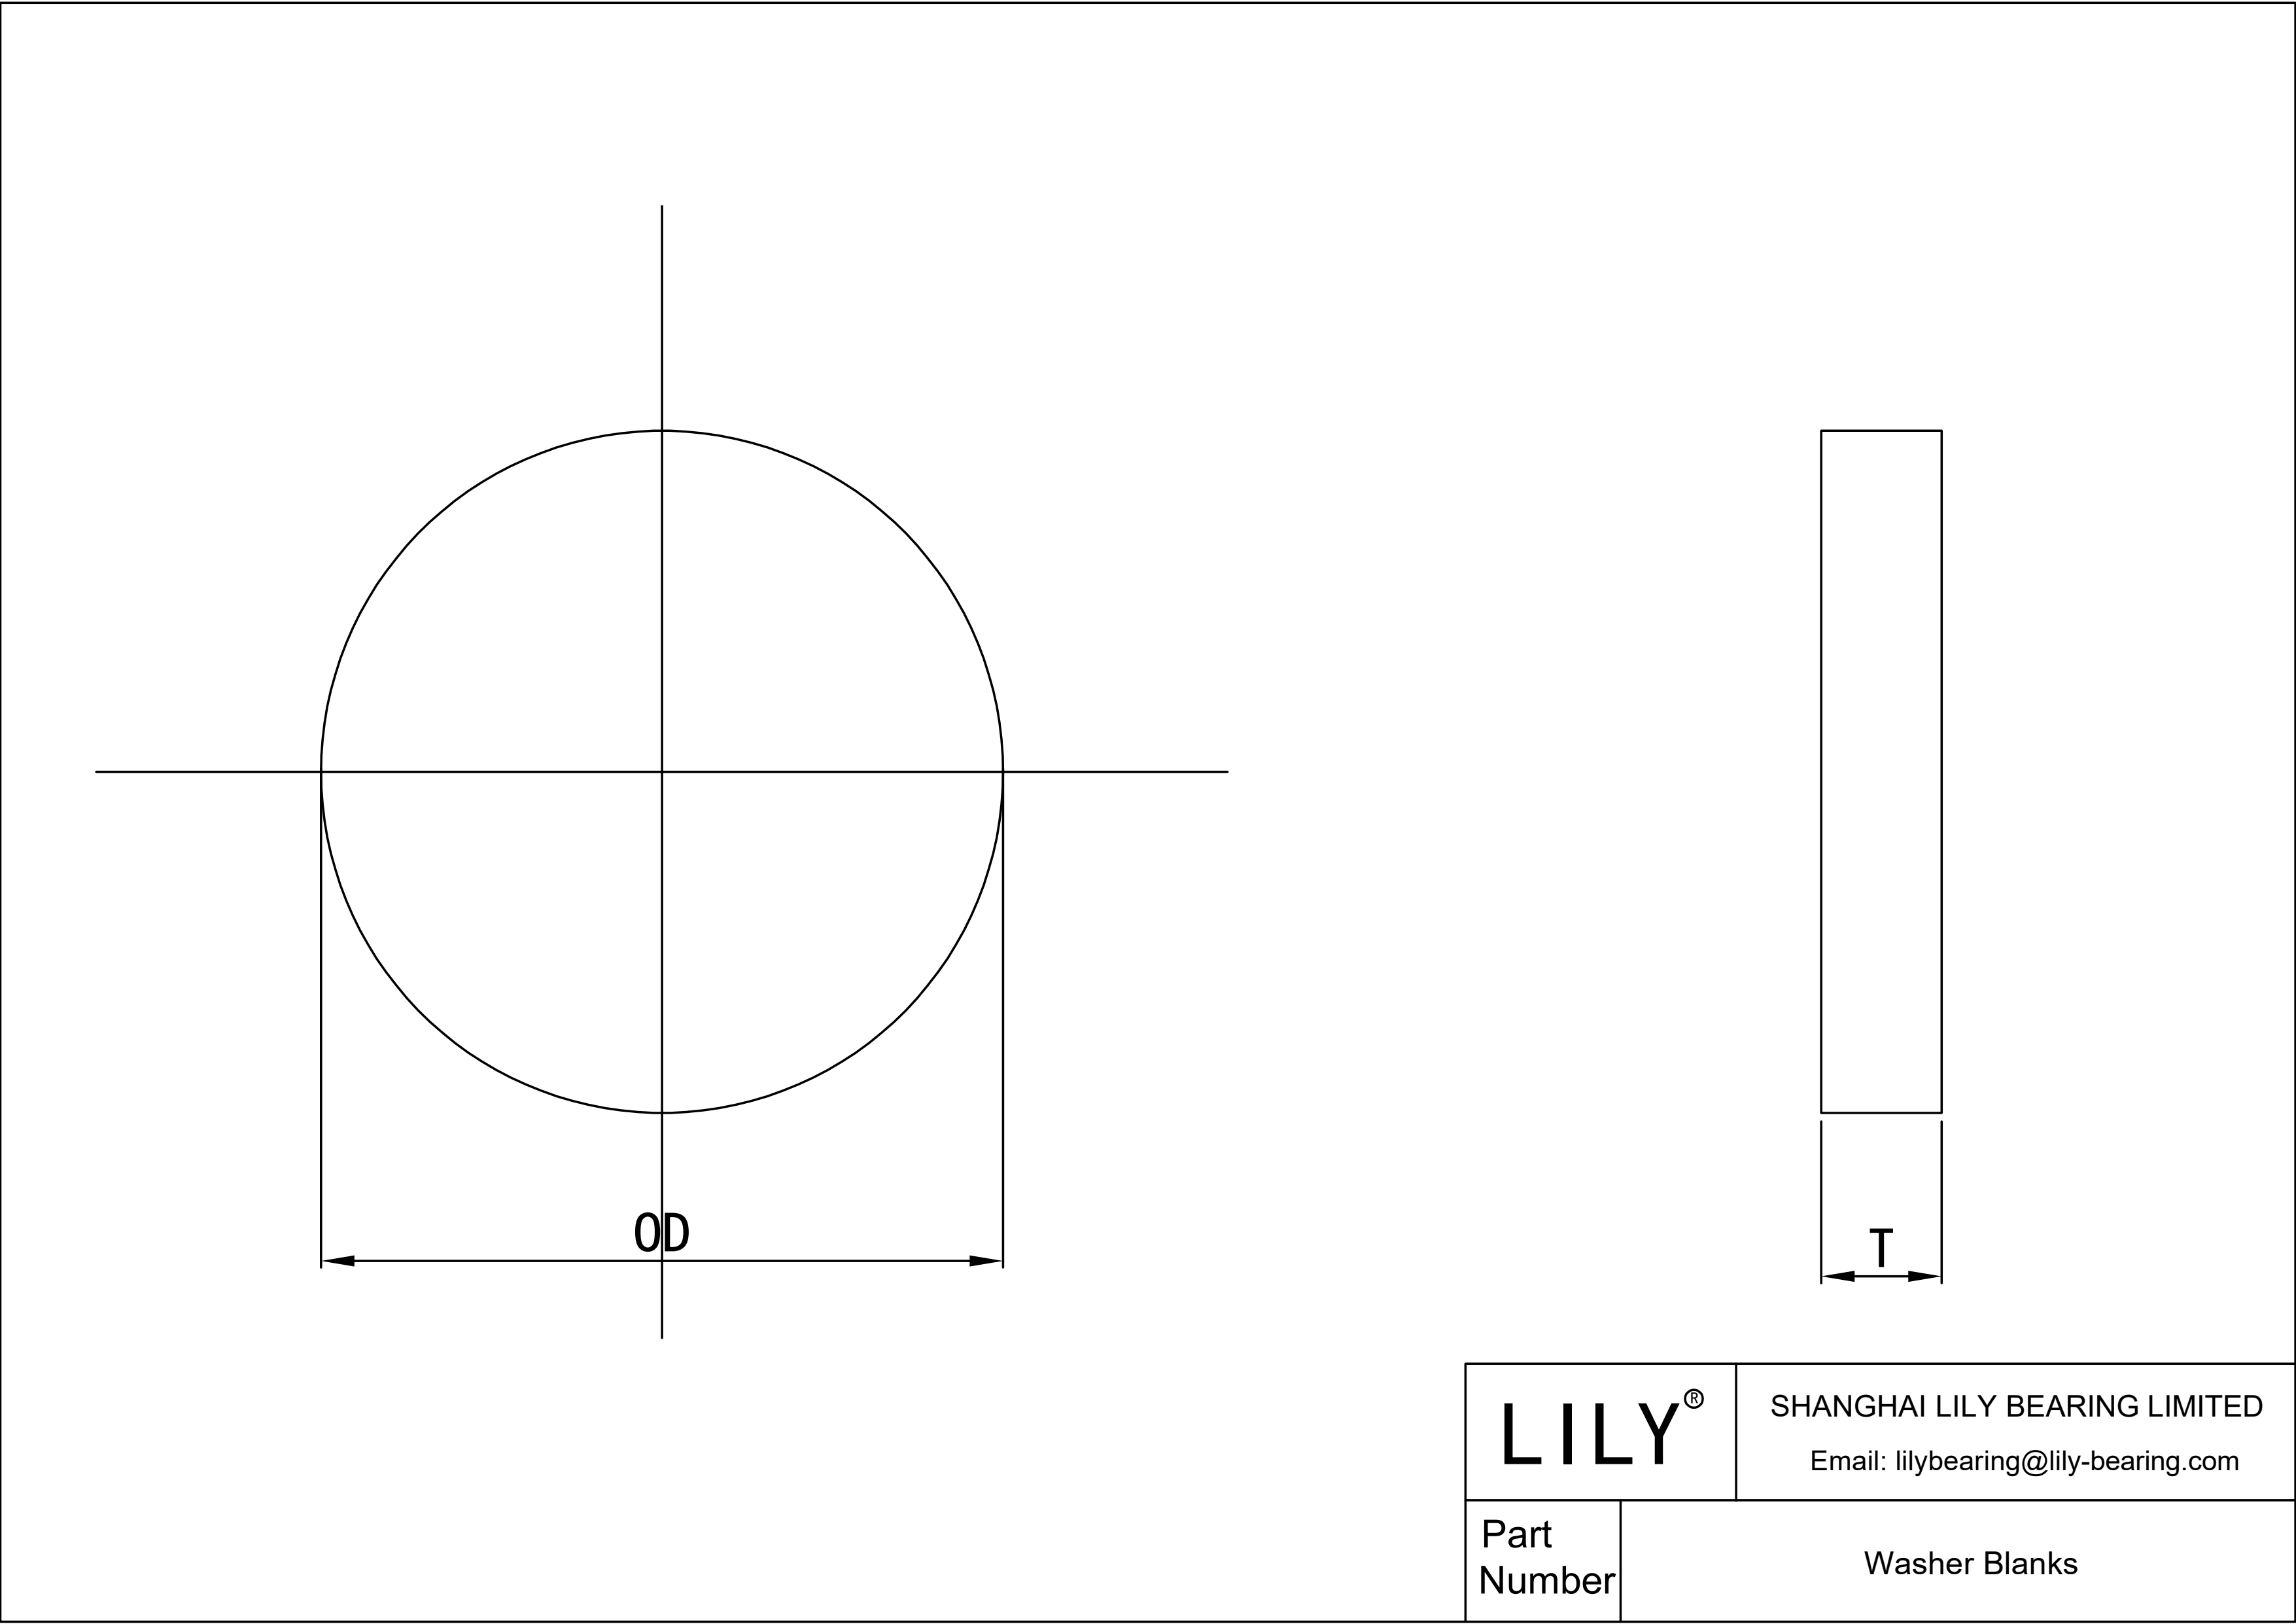 JDCHEACEA Washer Blanks cad drawing